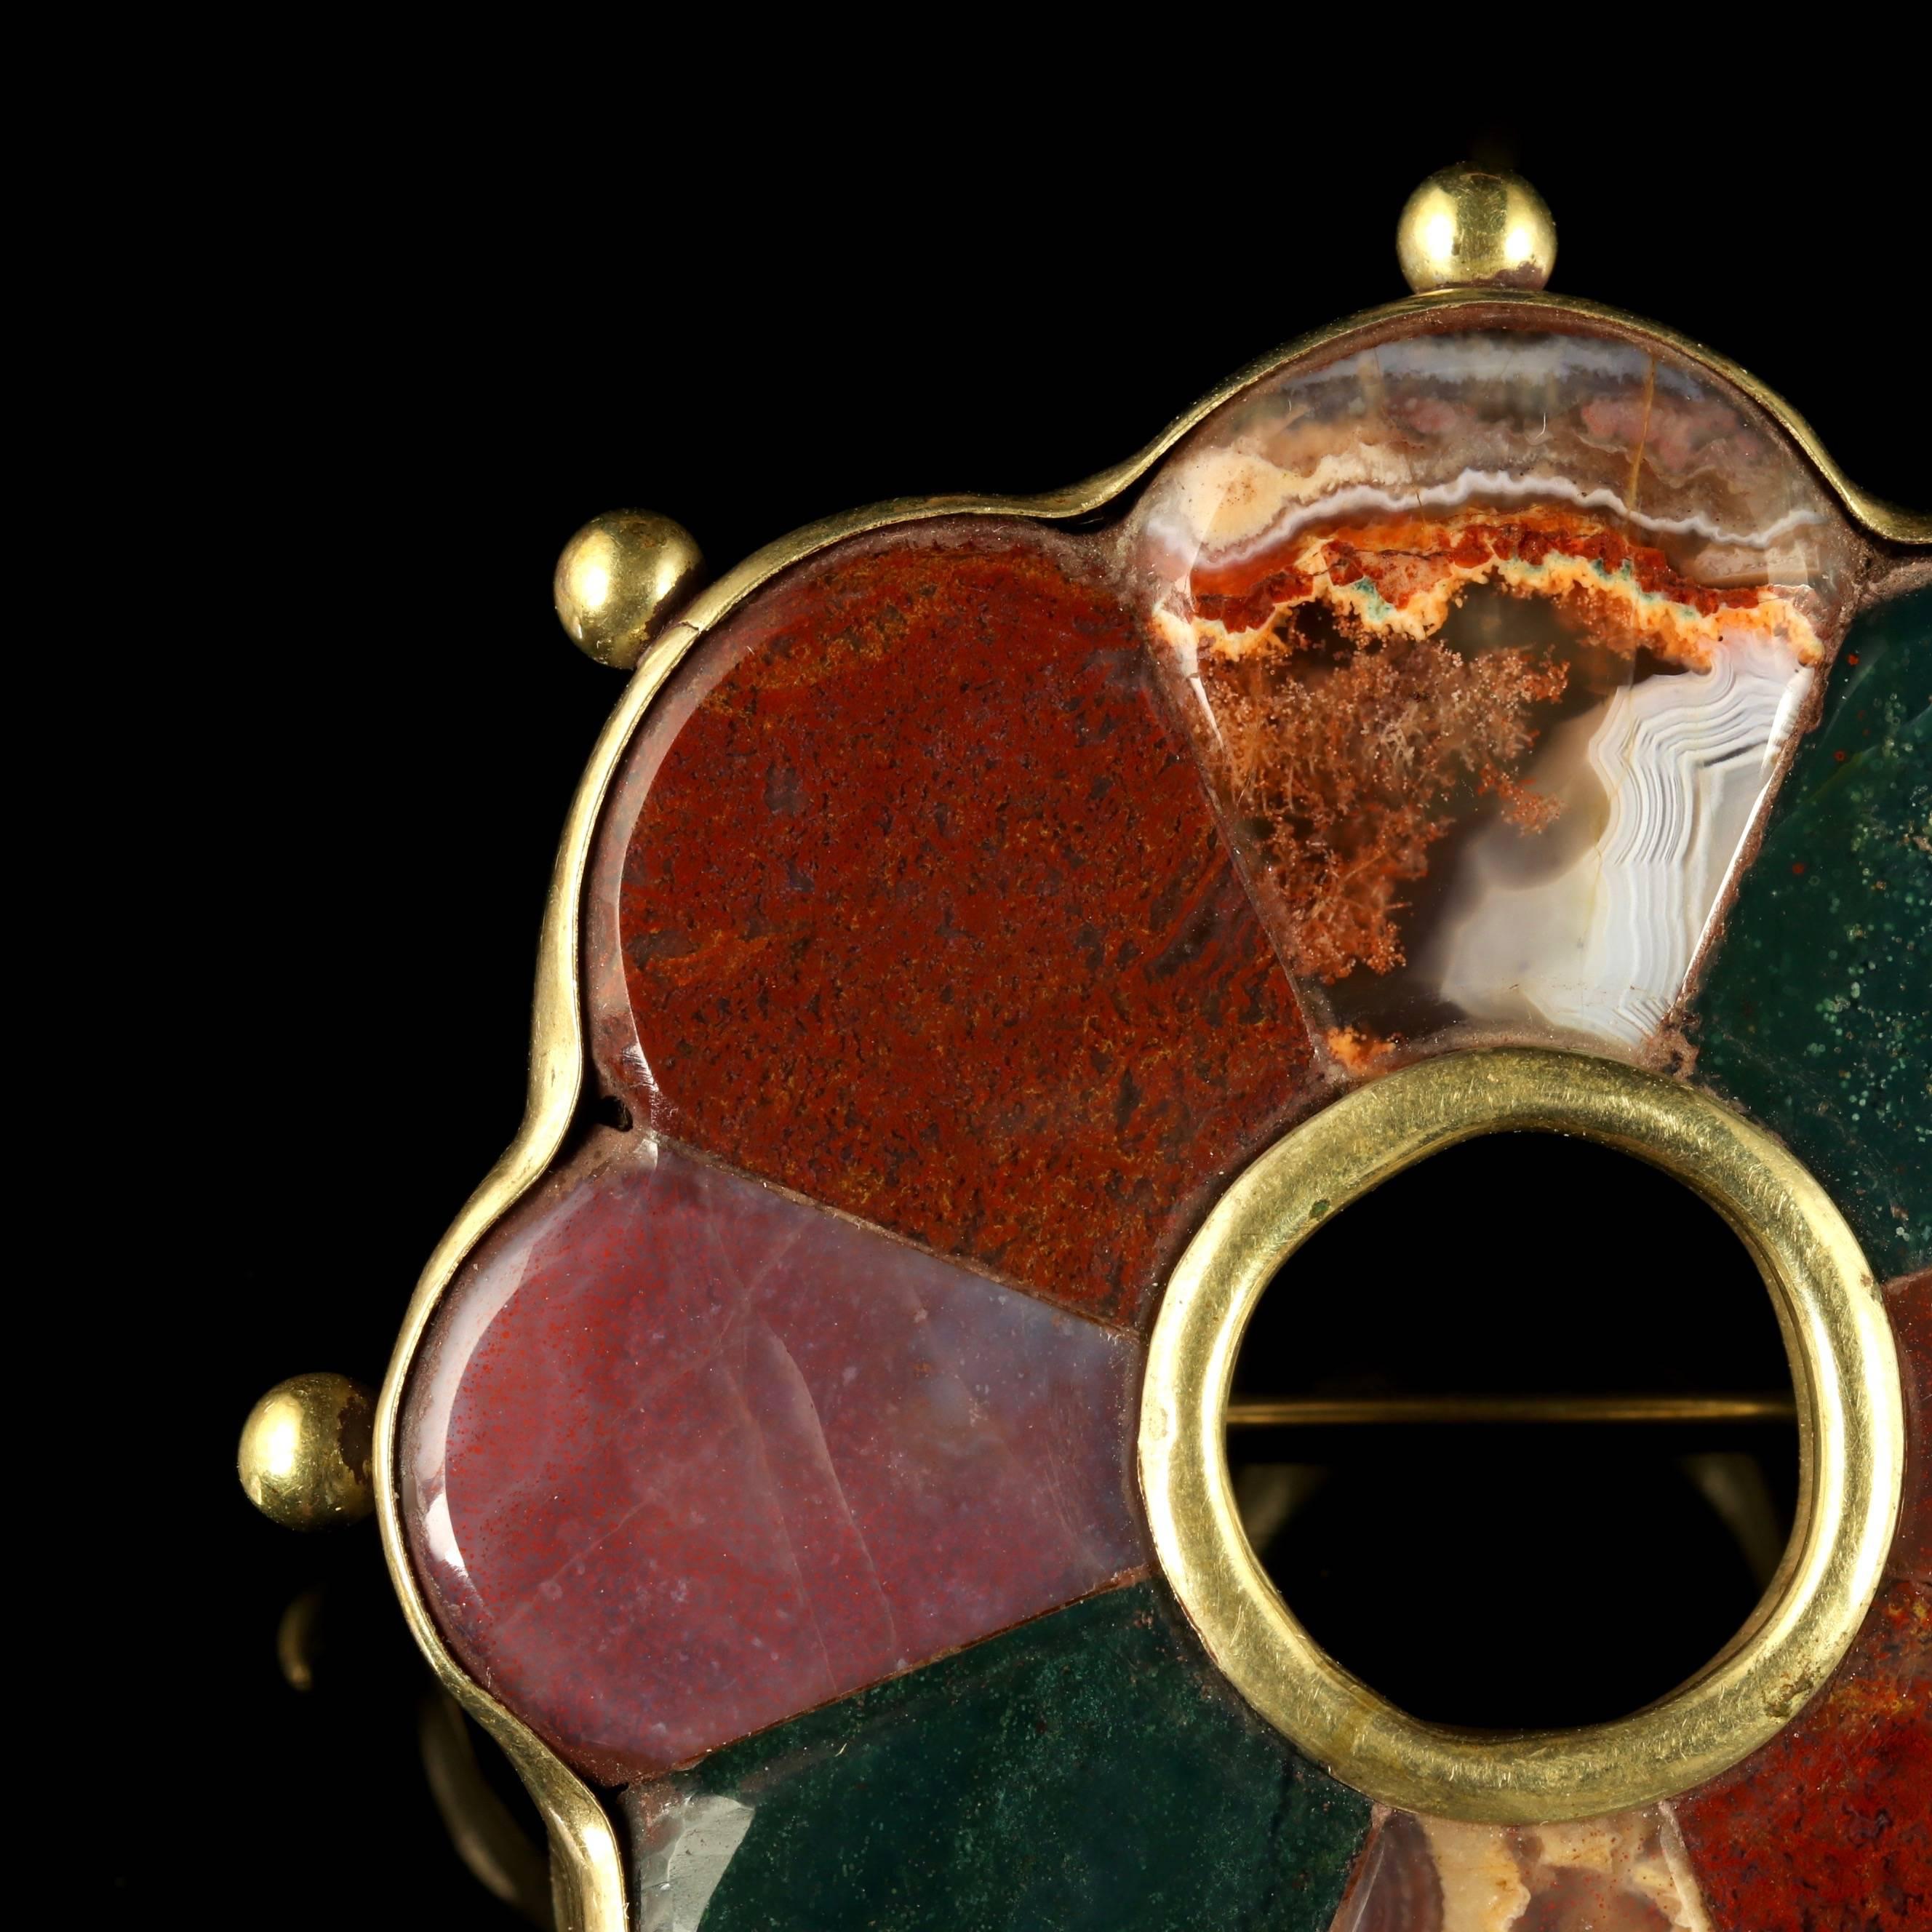 This beautiful Victorian Scottish Silver gilded on Gold brooch is adorned with fabulous Agates, Circa 1880.

Scottish jewellery was made popular by Queen Victoria as it became a souvenir of her frequent trips to Scotland and her Scottish Castle